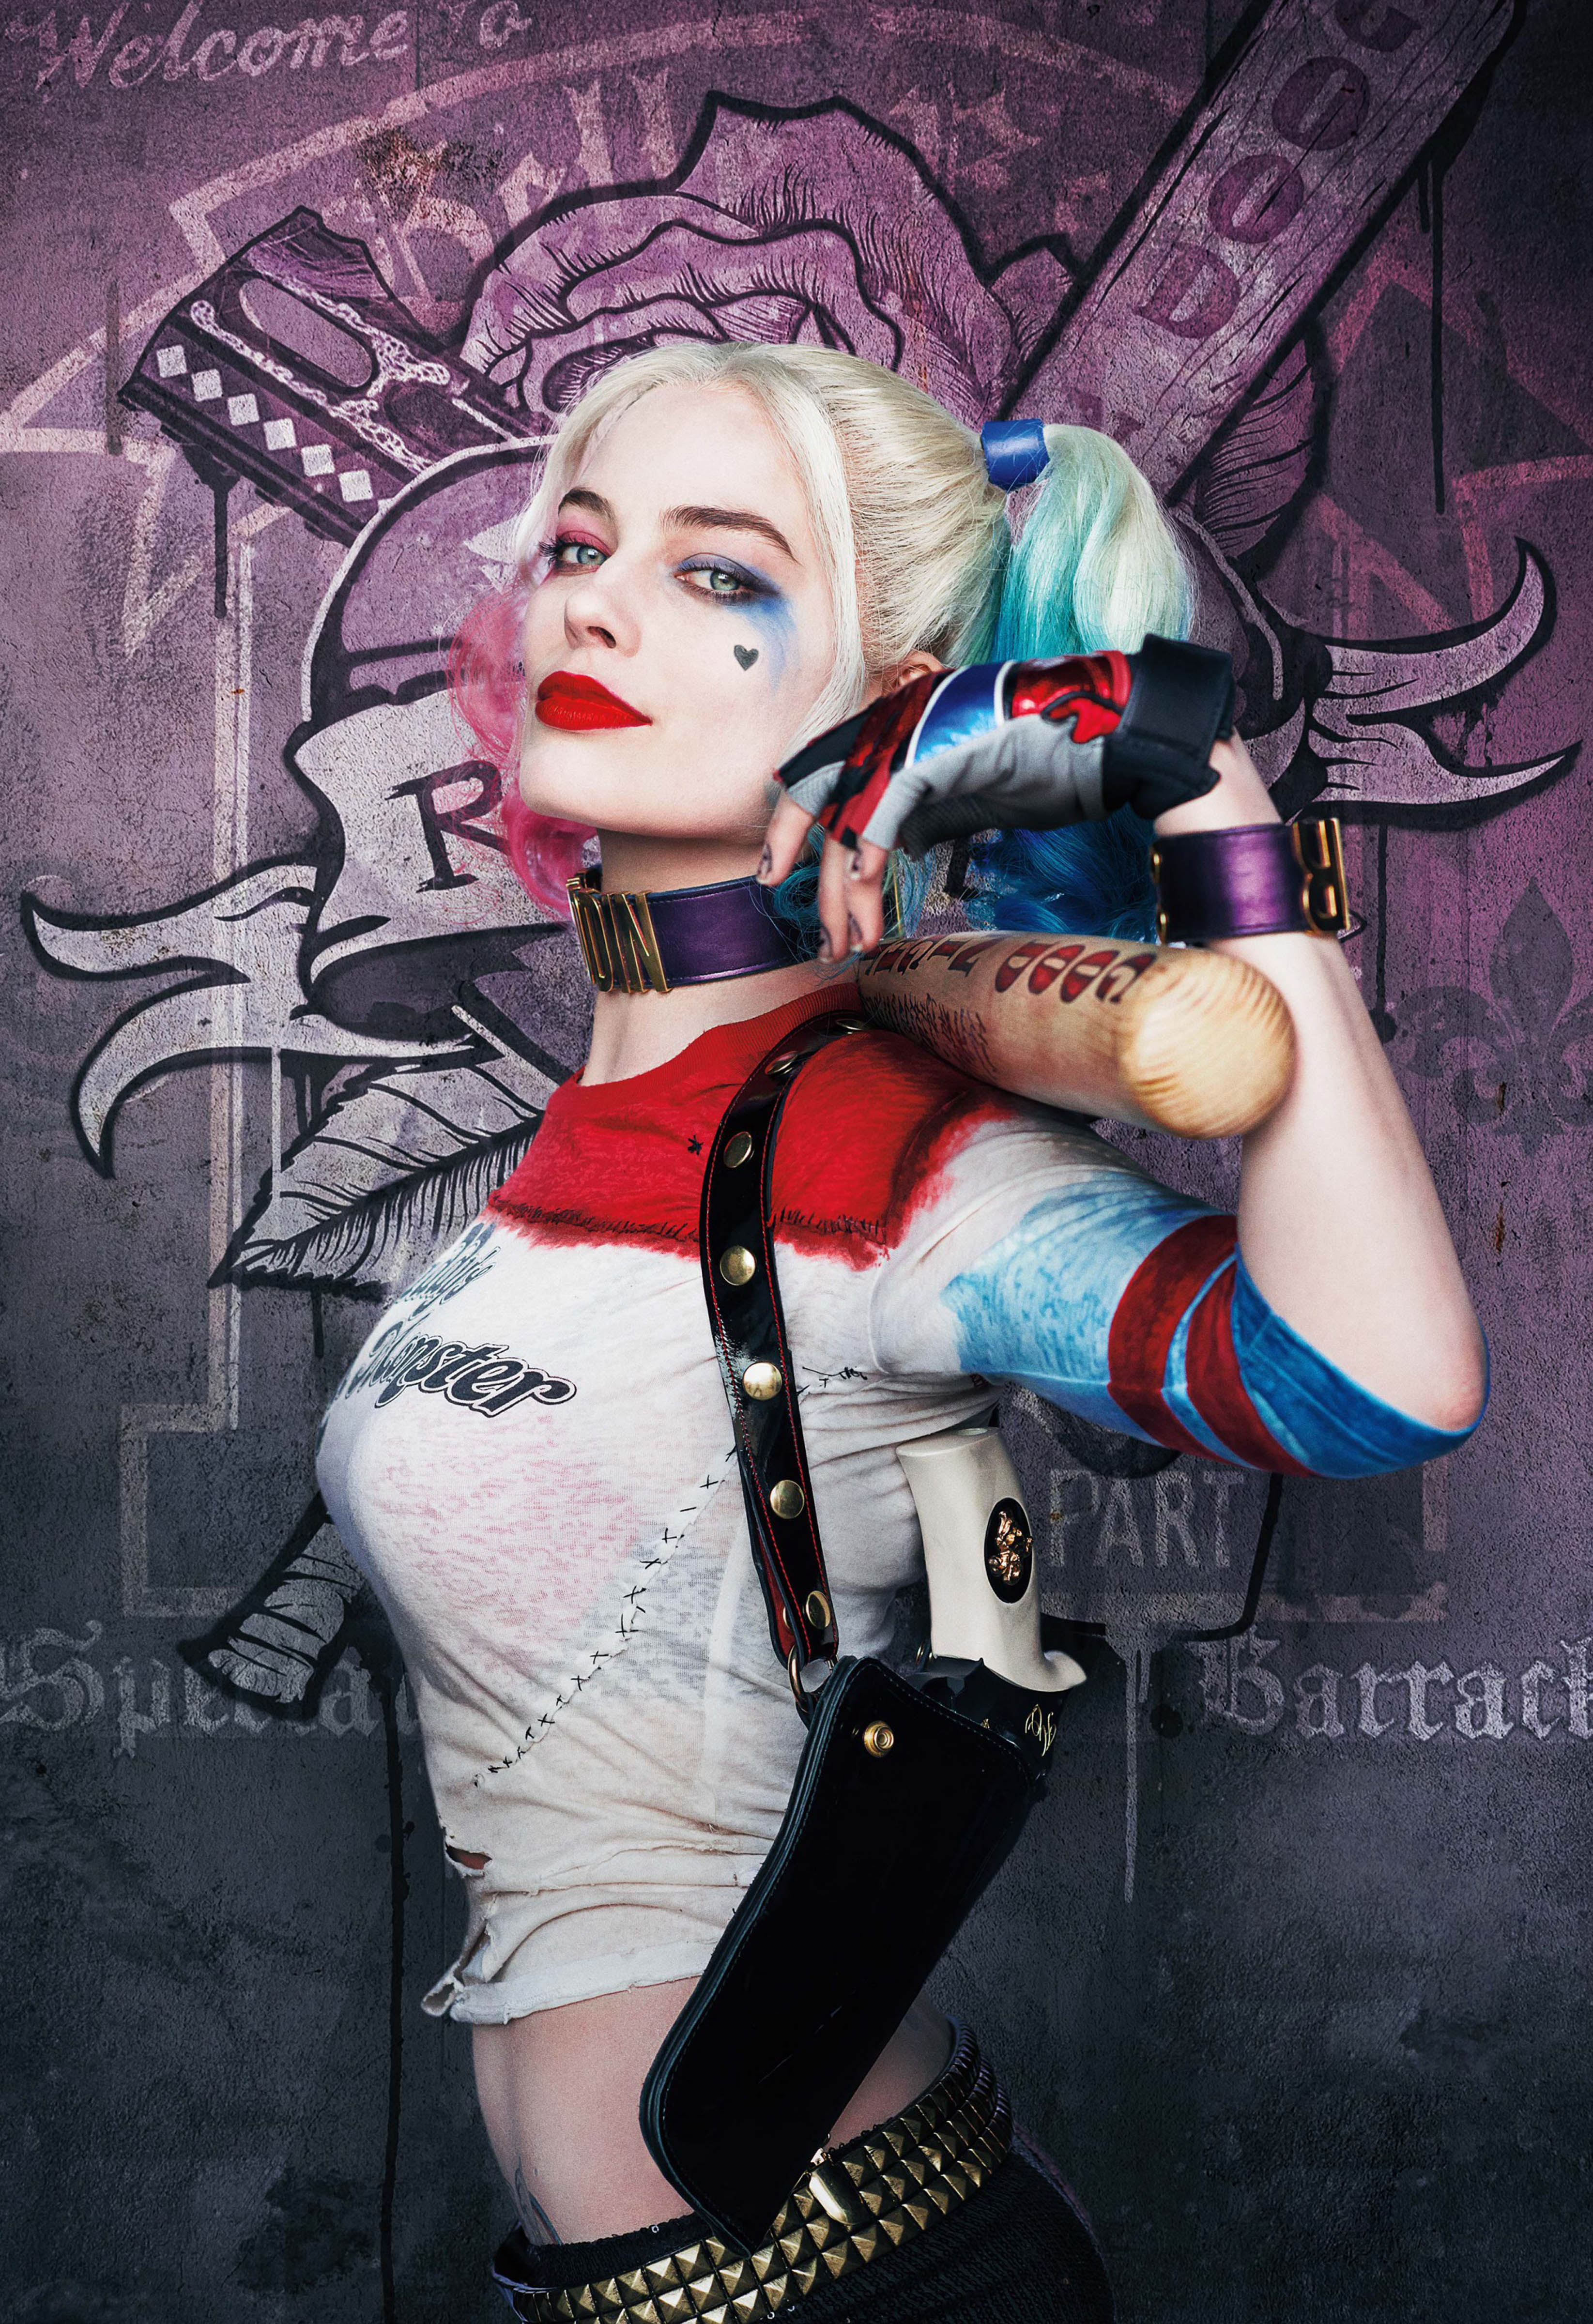 brandon hamiel recommends hot harley quinn images pic